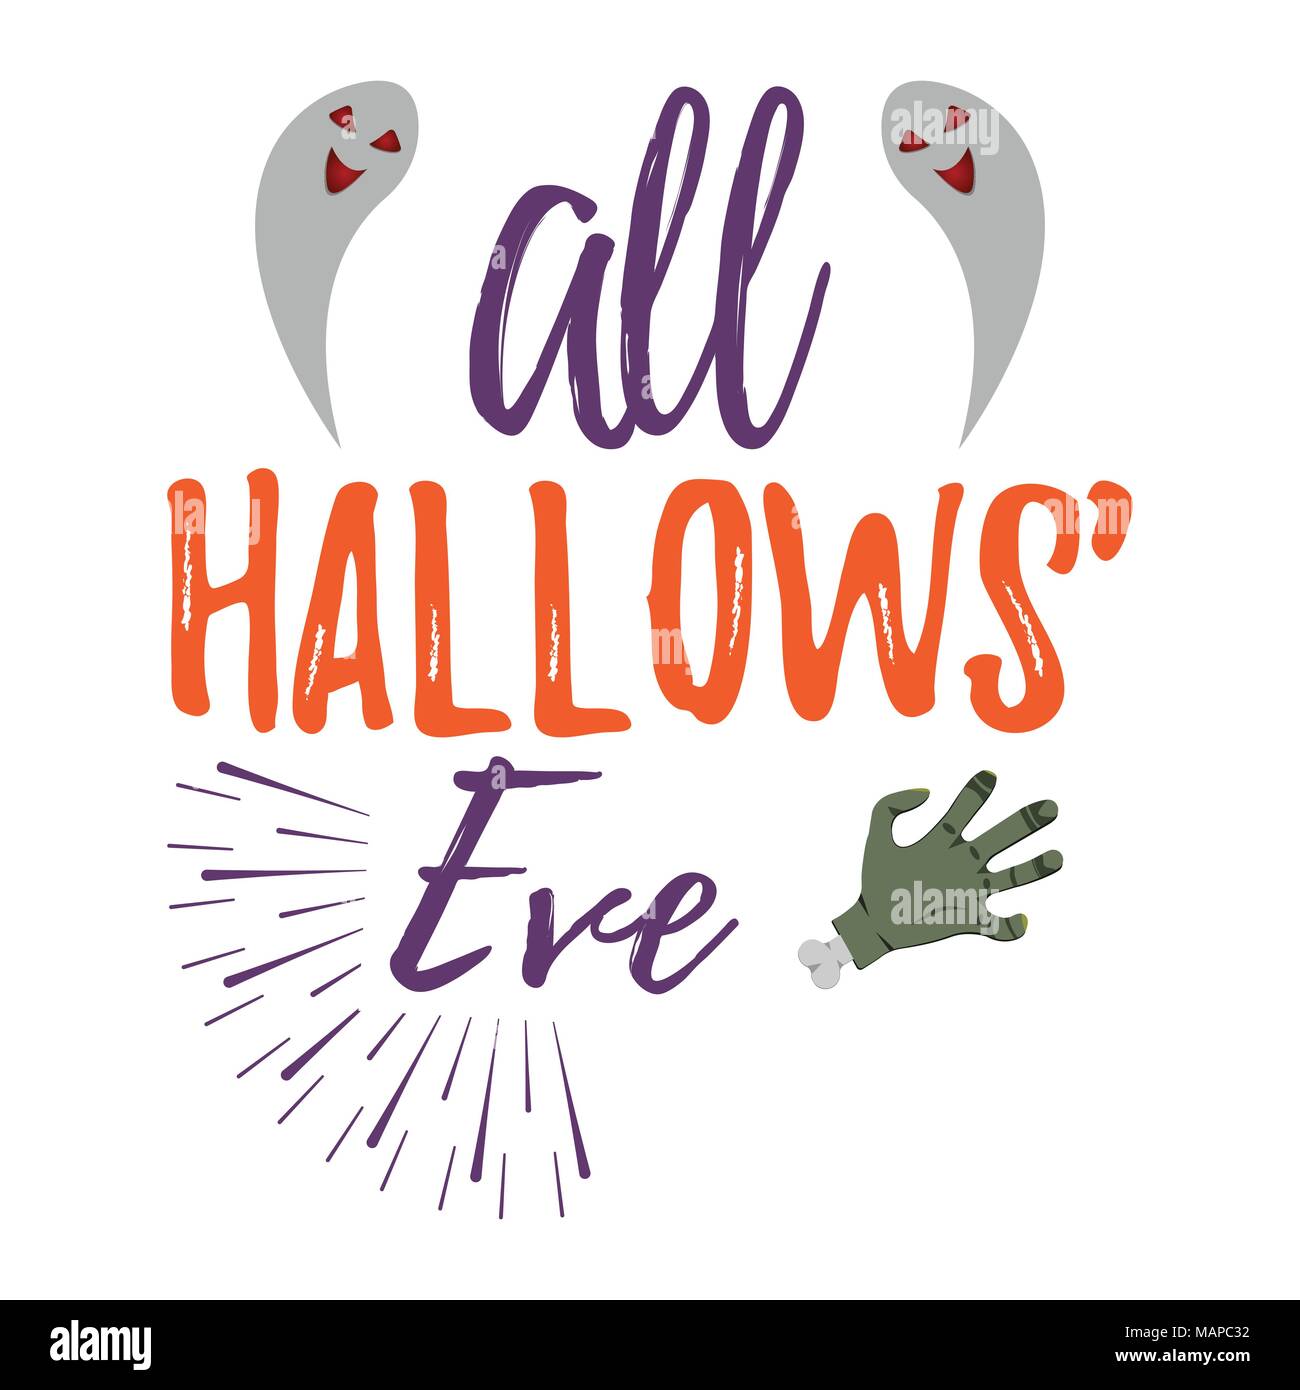 Happy Halloween Greeting Card with Calligraphic Text. Halloween Poster and Banner on White Background. Vector illustration. Stock Vector